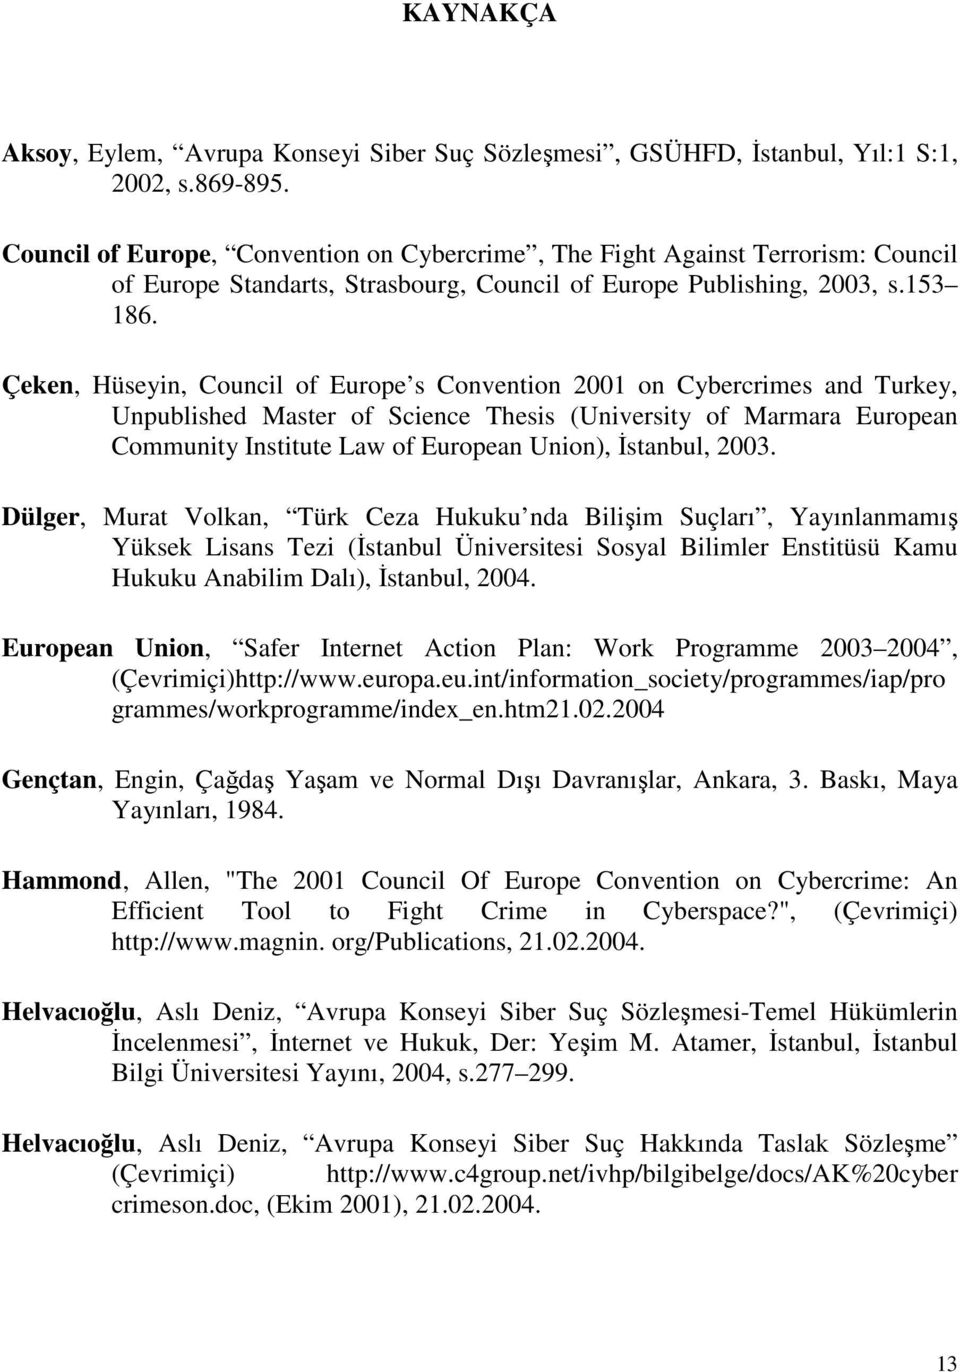 Çeken, Hüseyin, Council of Europe s Convention 2001 on Cybercrimes and Turkey, Unpublished Master of Science Thesis (University of Marmara European Community Institute Law of European Union),